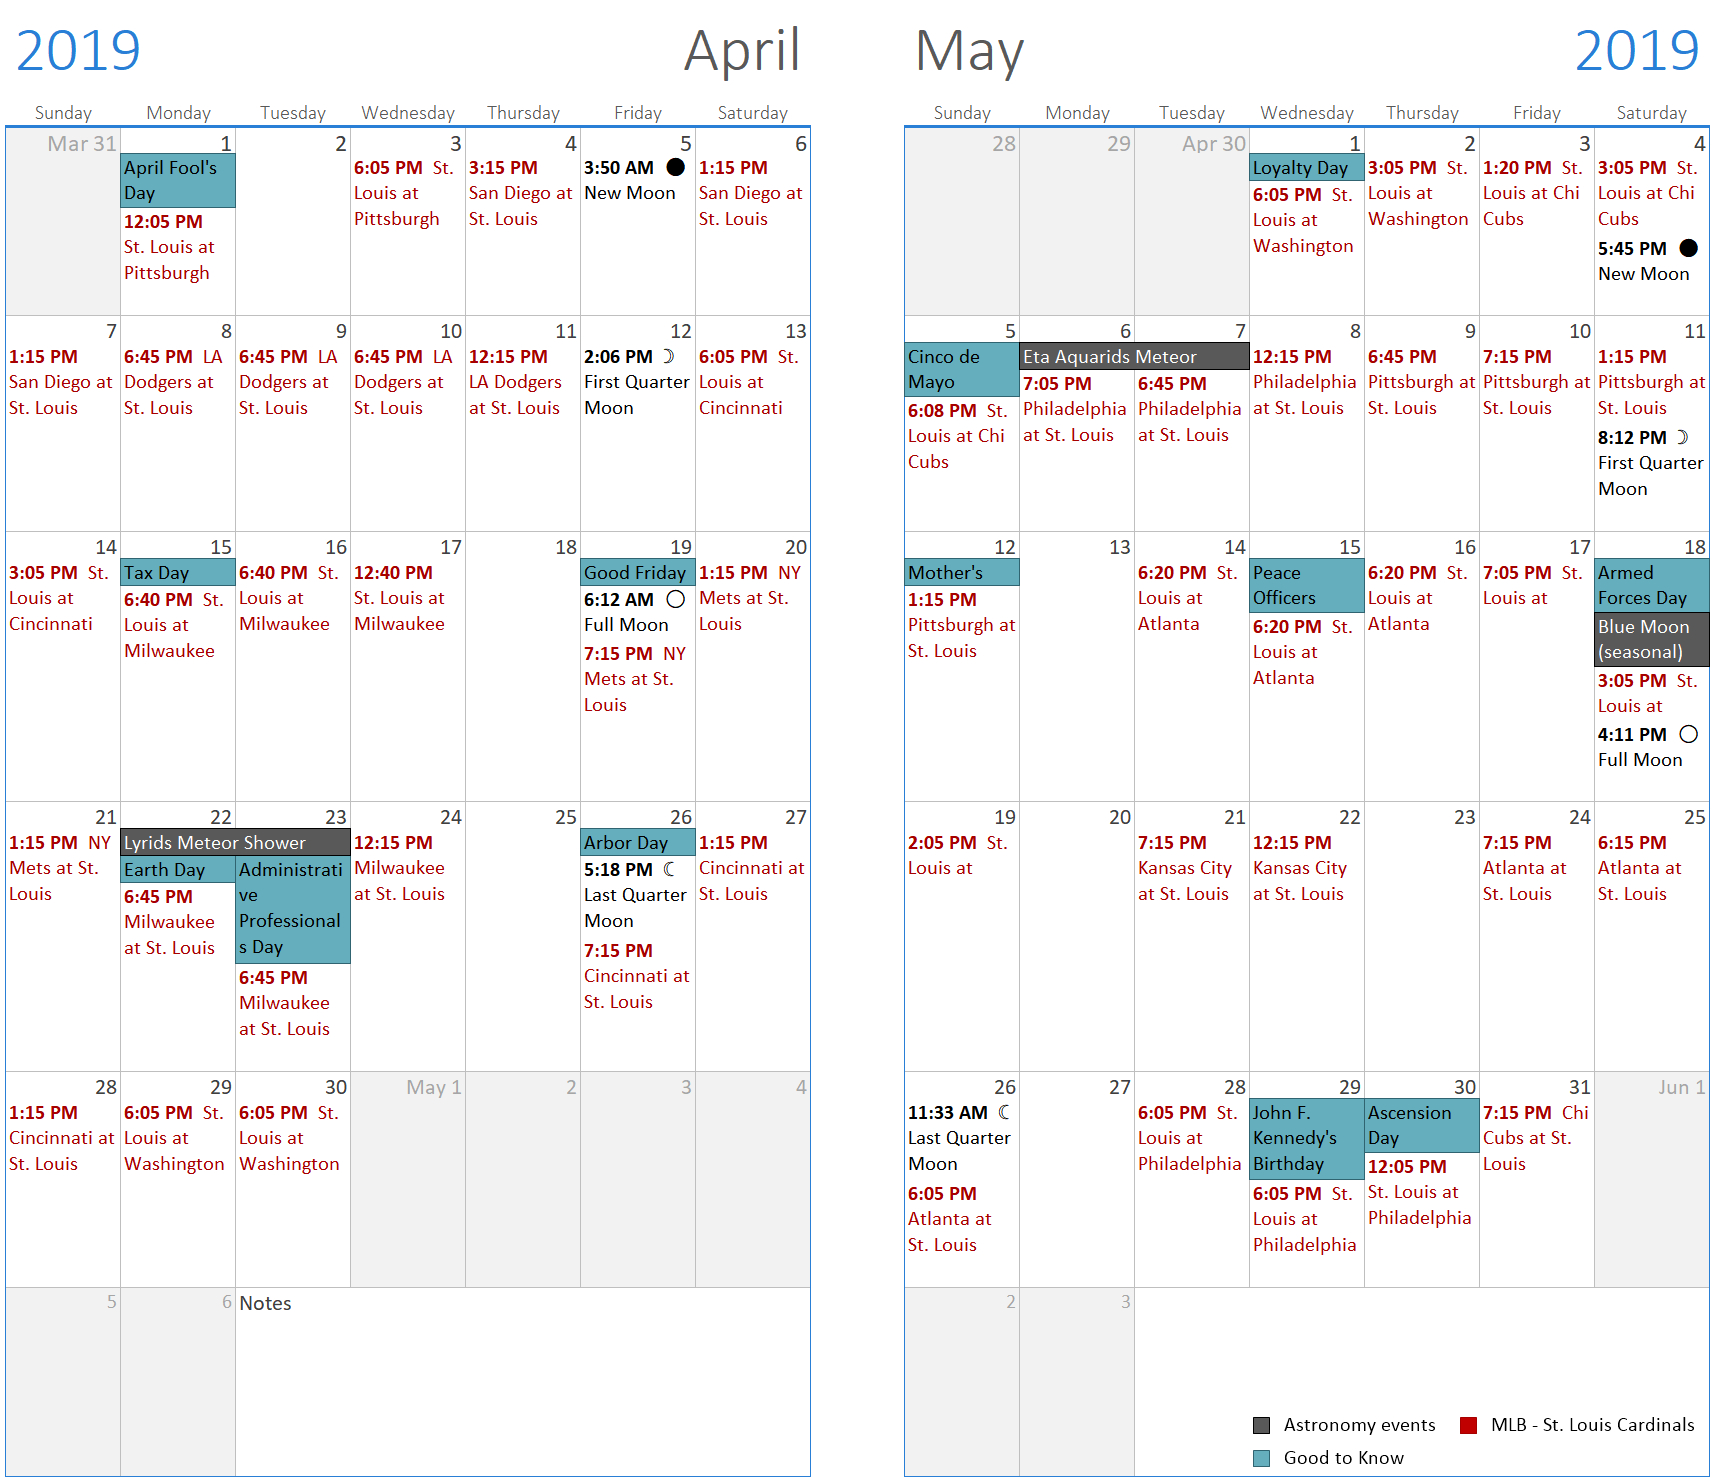 Customize And Print Calendar Templates In Excel And Word